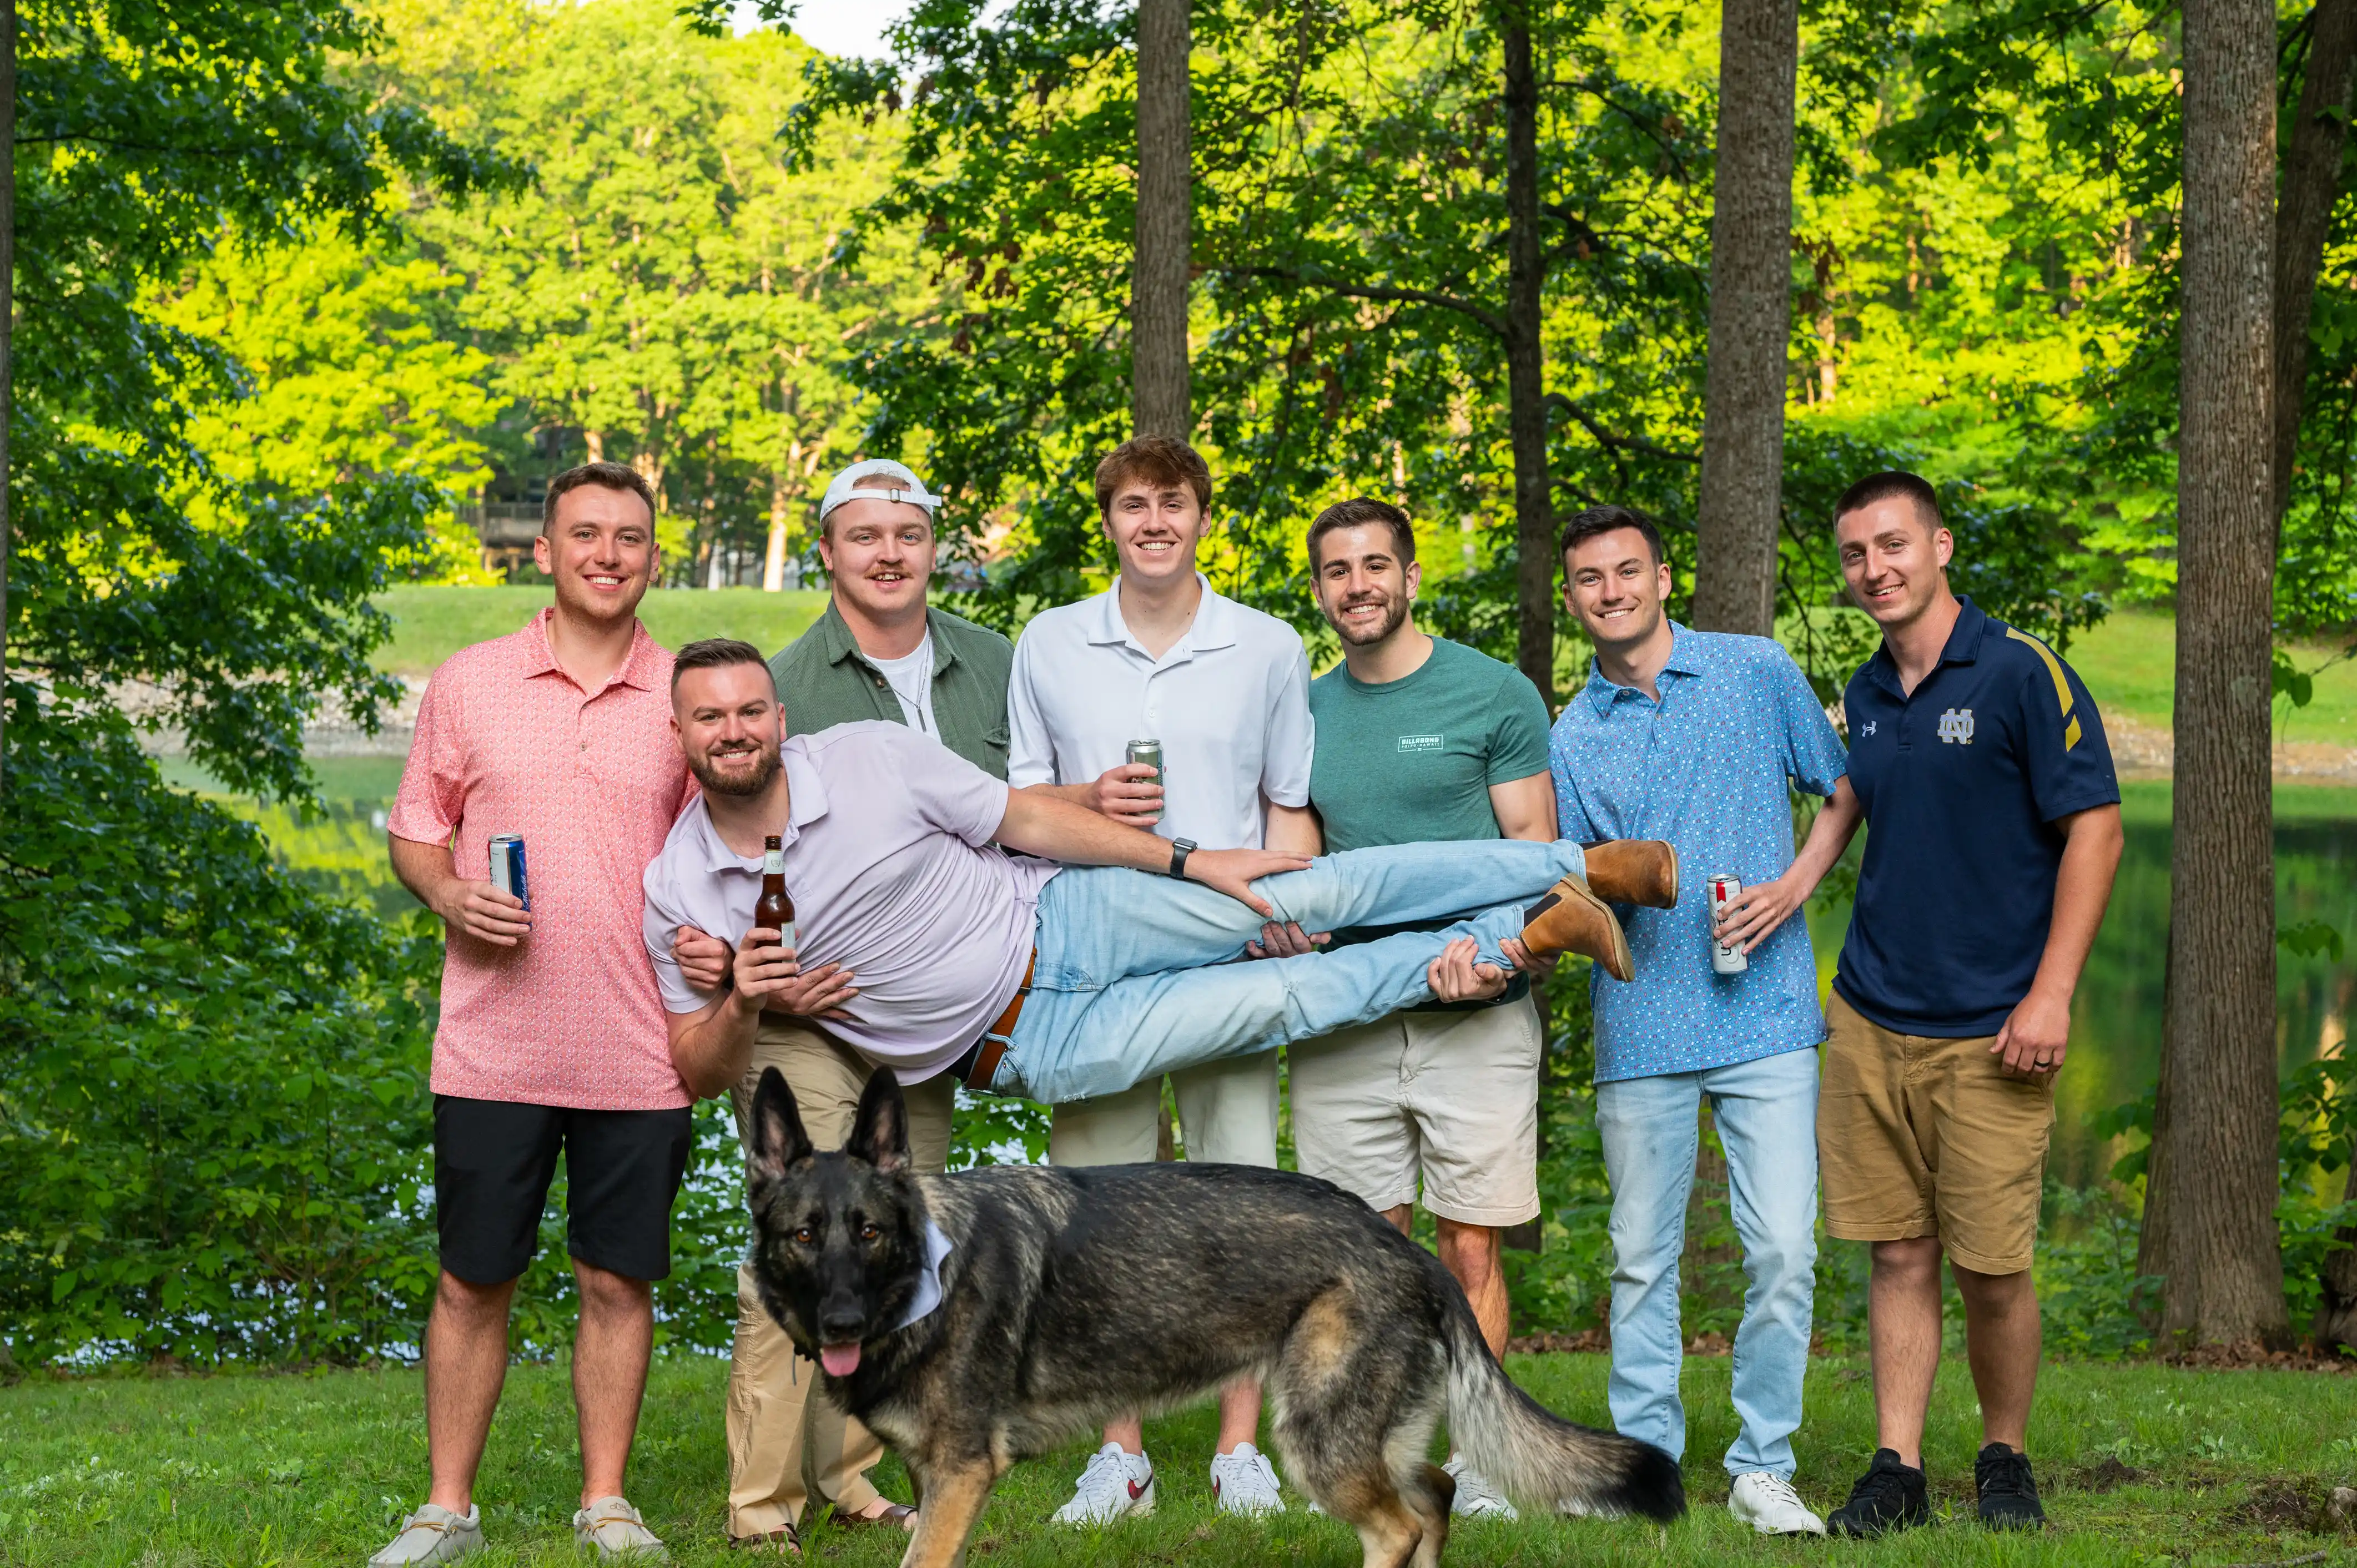 Group of smiling friends posing outdoors with a dog.